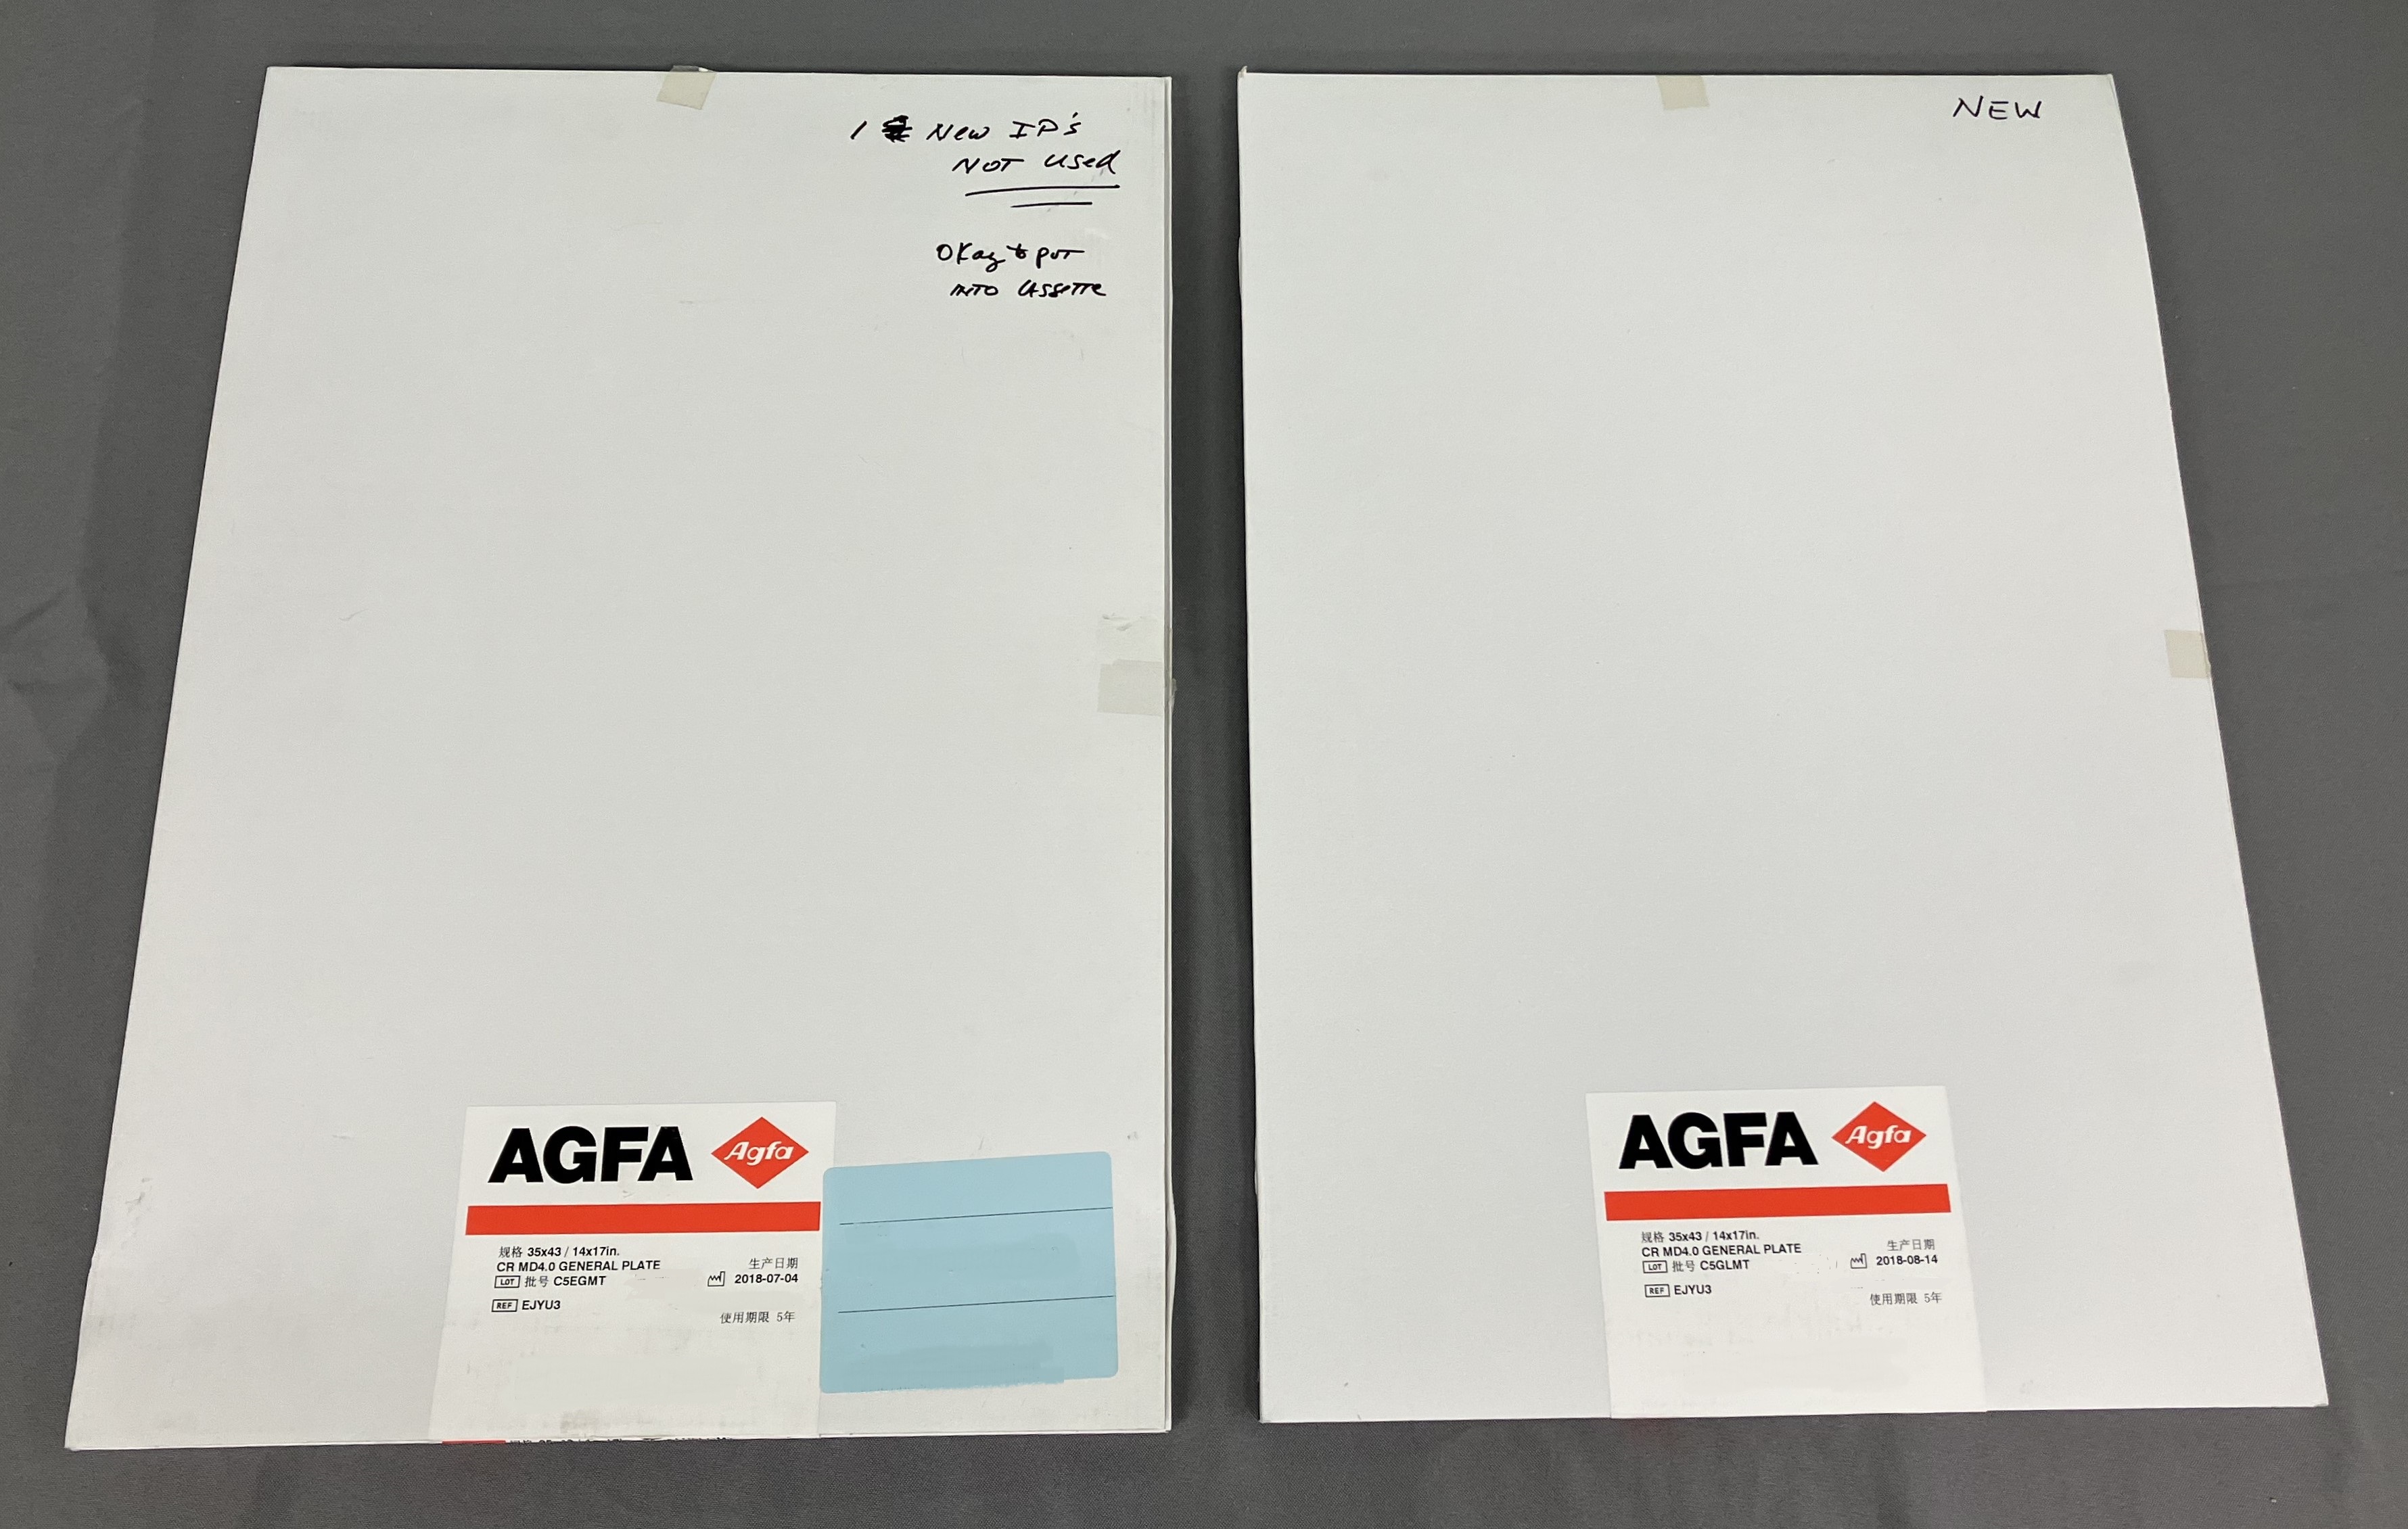 AGFA CR MD4.0 General Imaging Plate 14x17 in REF: EJYU3 â€“ Lot of 2